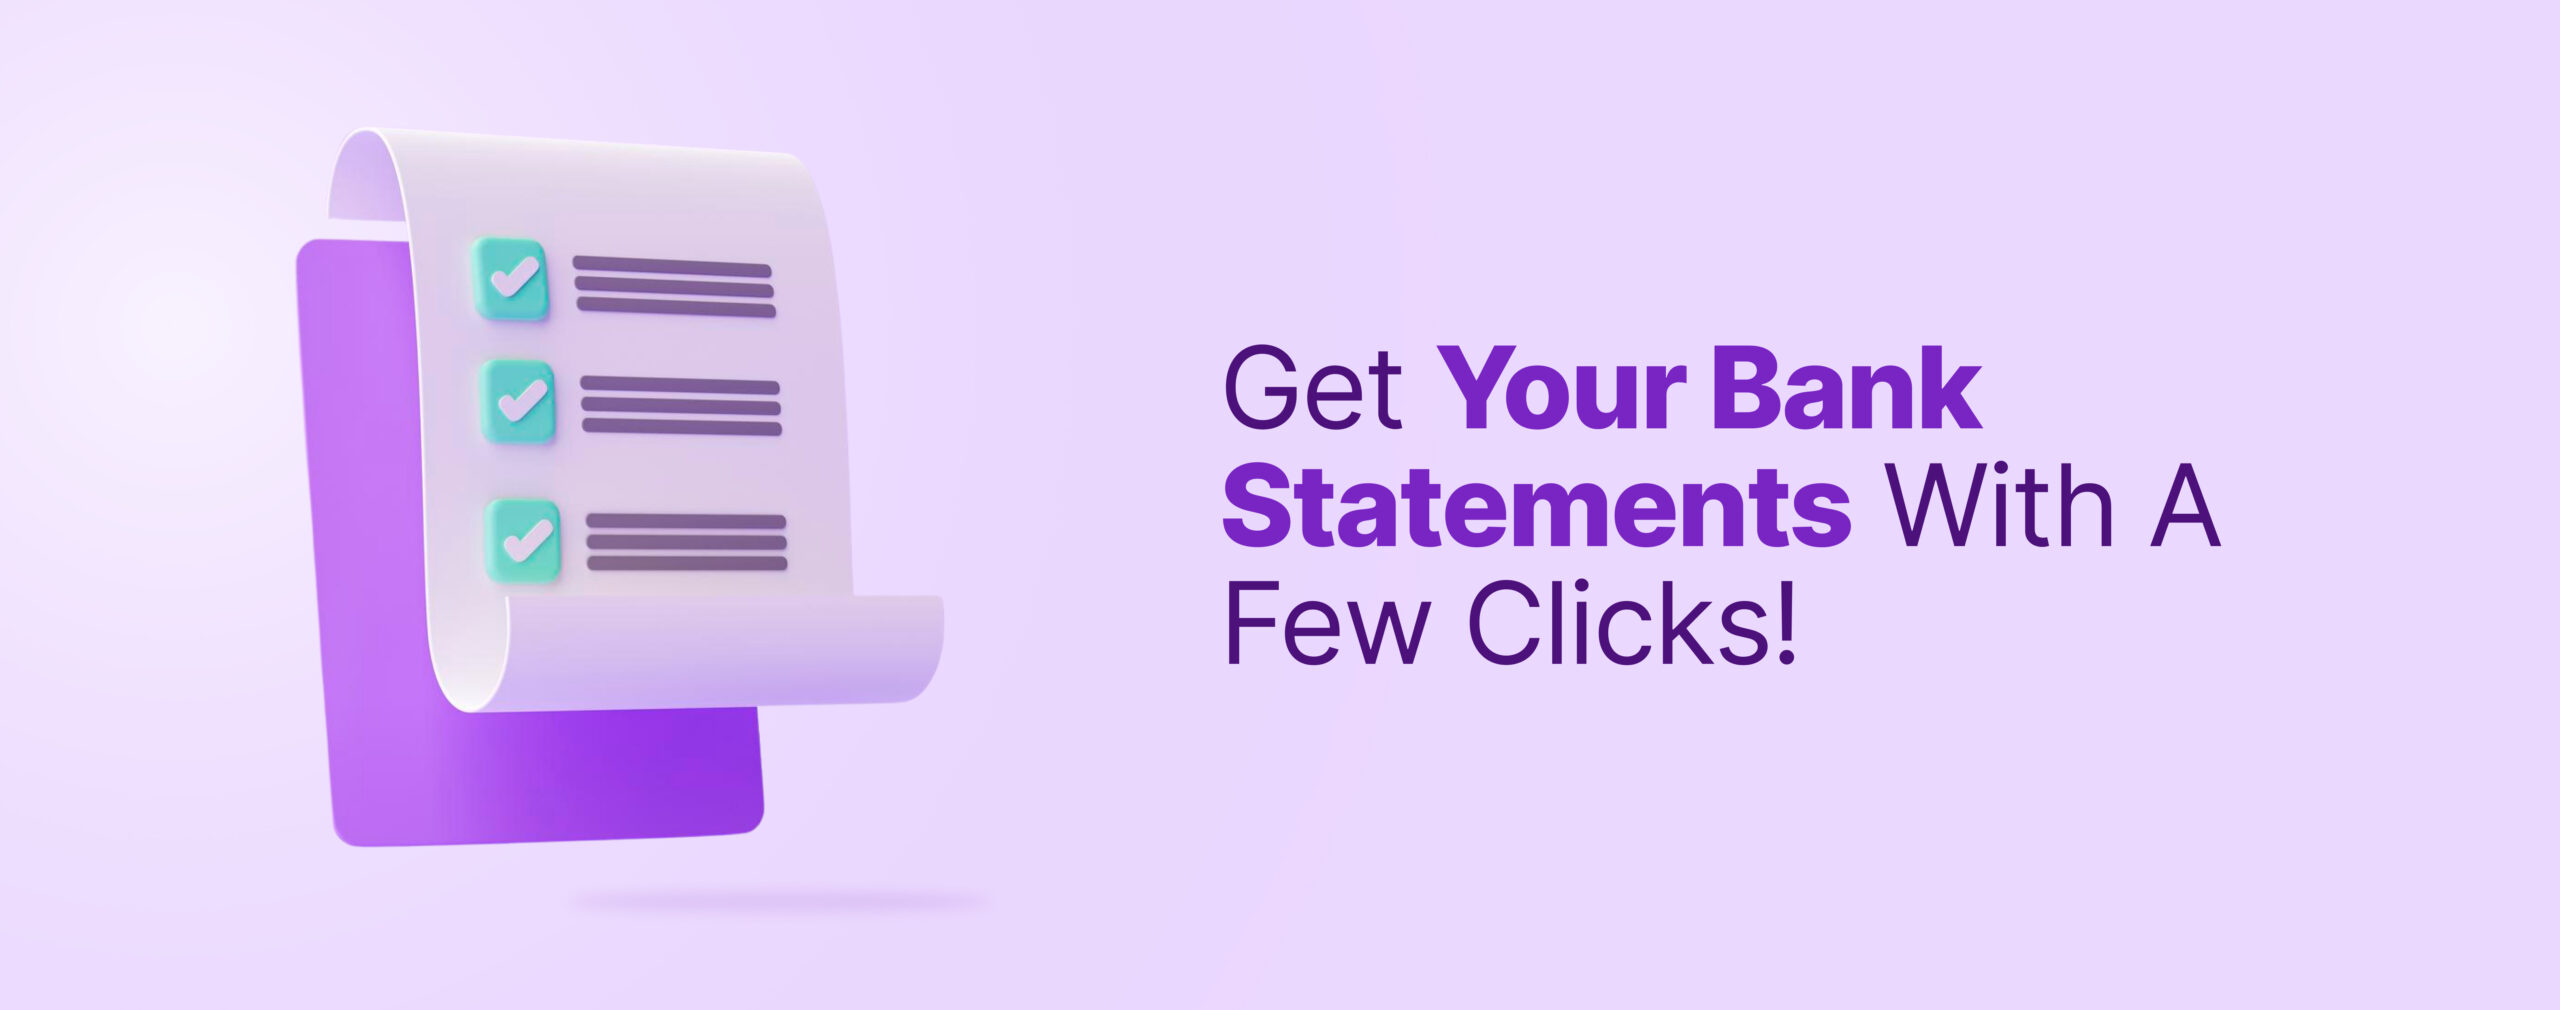 Get statements with a few clicks